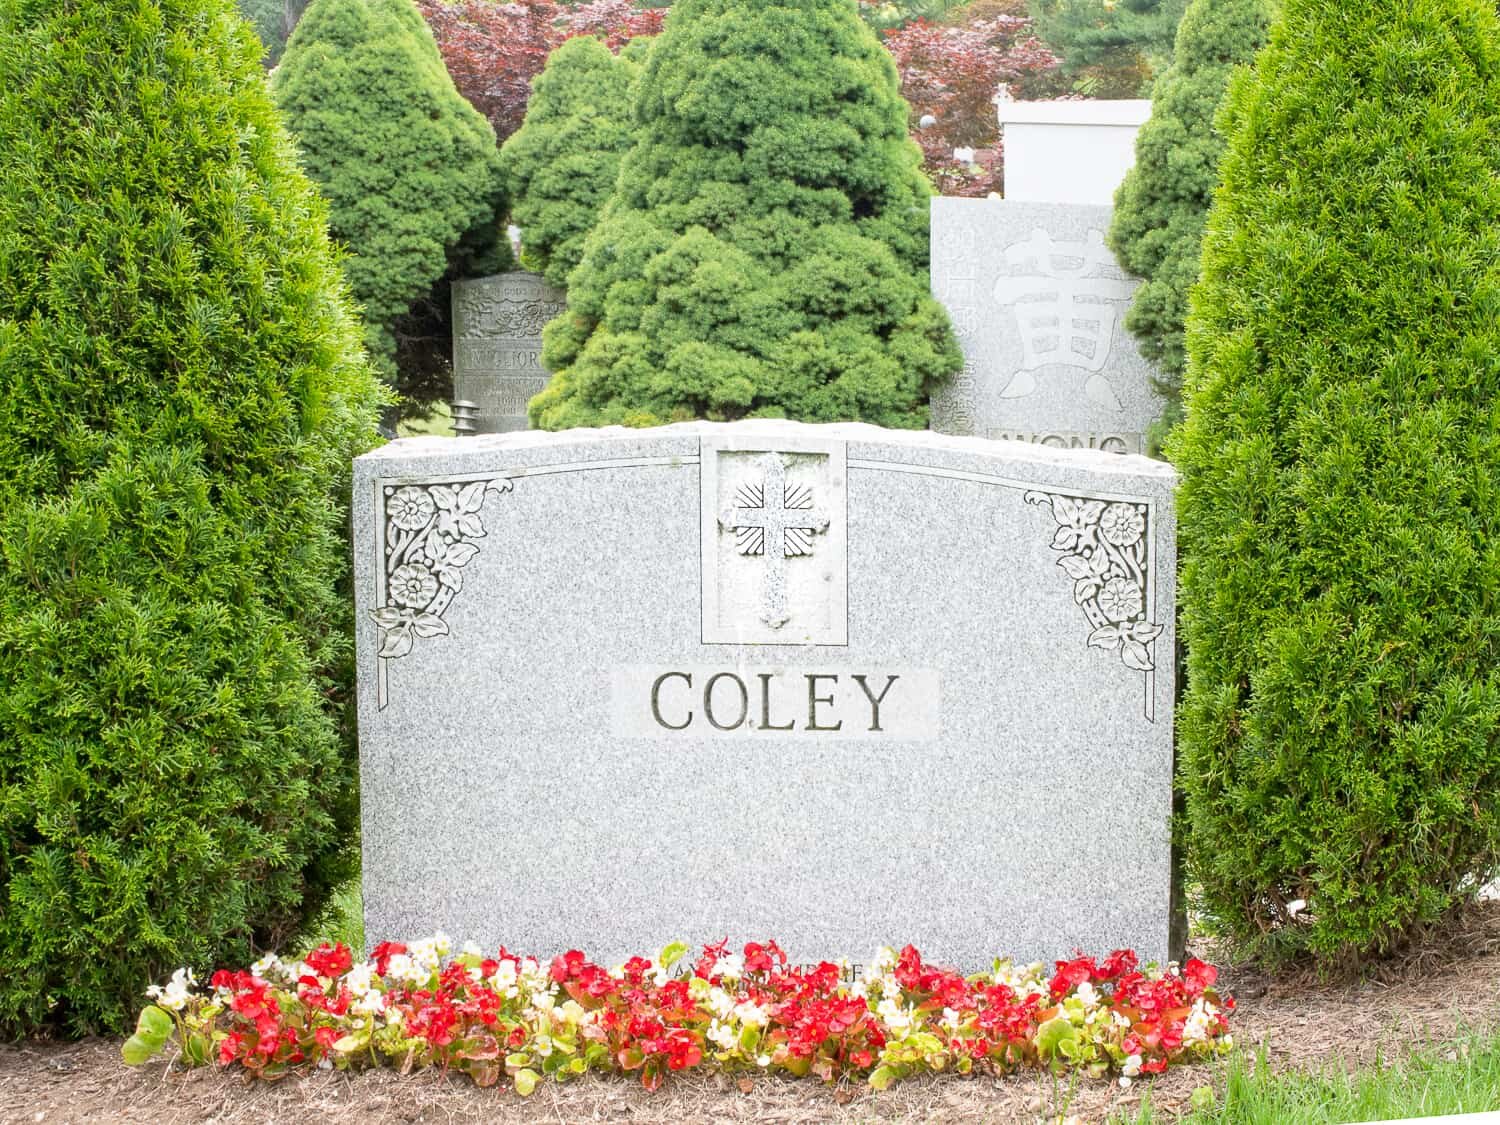 Coley modern tombstone with begonias and yews